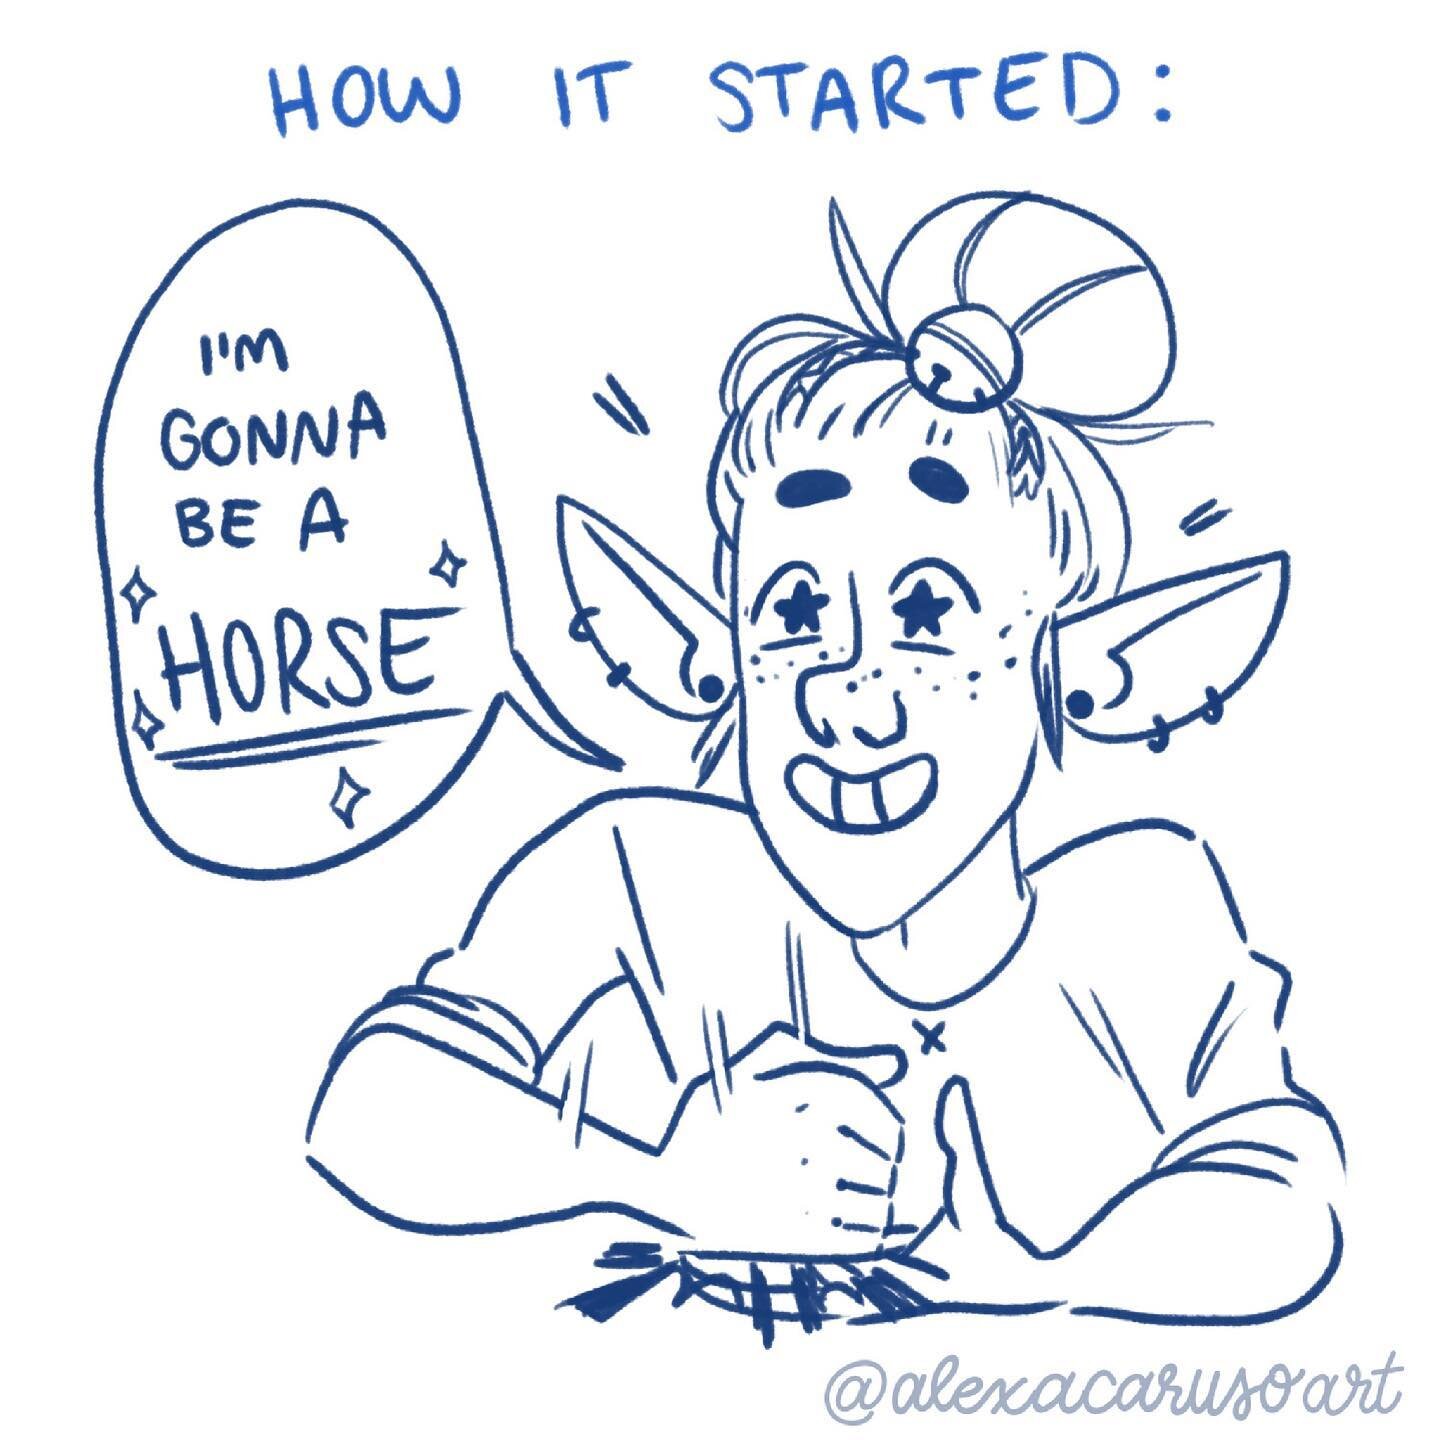 Sometimes my DnD character is a horse and it always goes 100% as planned. For sure for sure for sure. 
&bull;
&bull;
&bull;
&bull;
&bull;
#illustration #comics #dnd #dungeonsanddragons